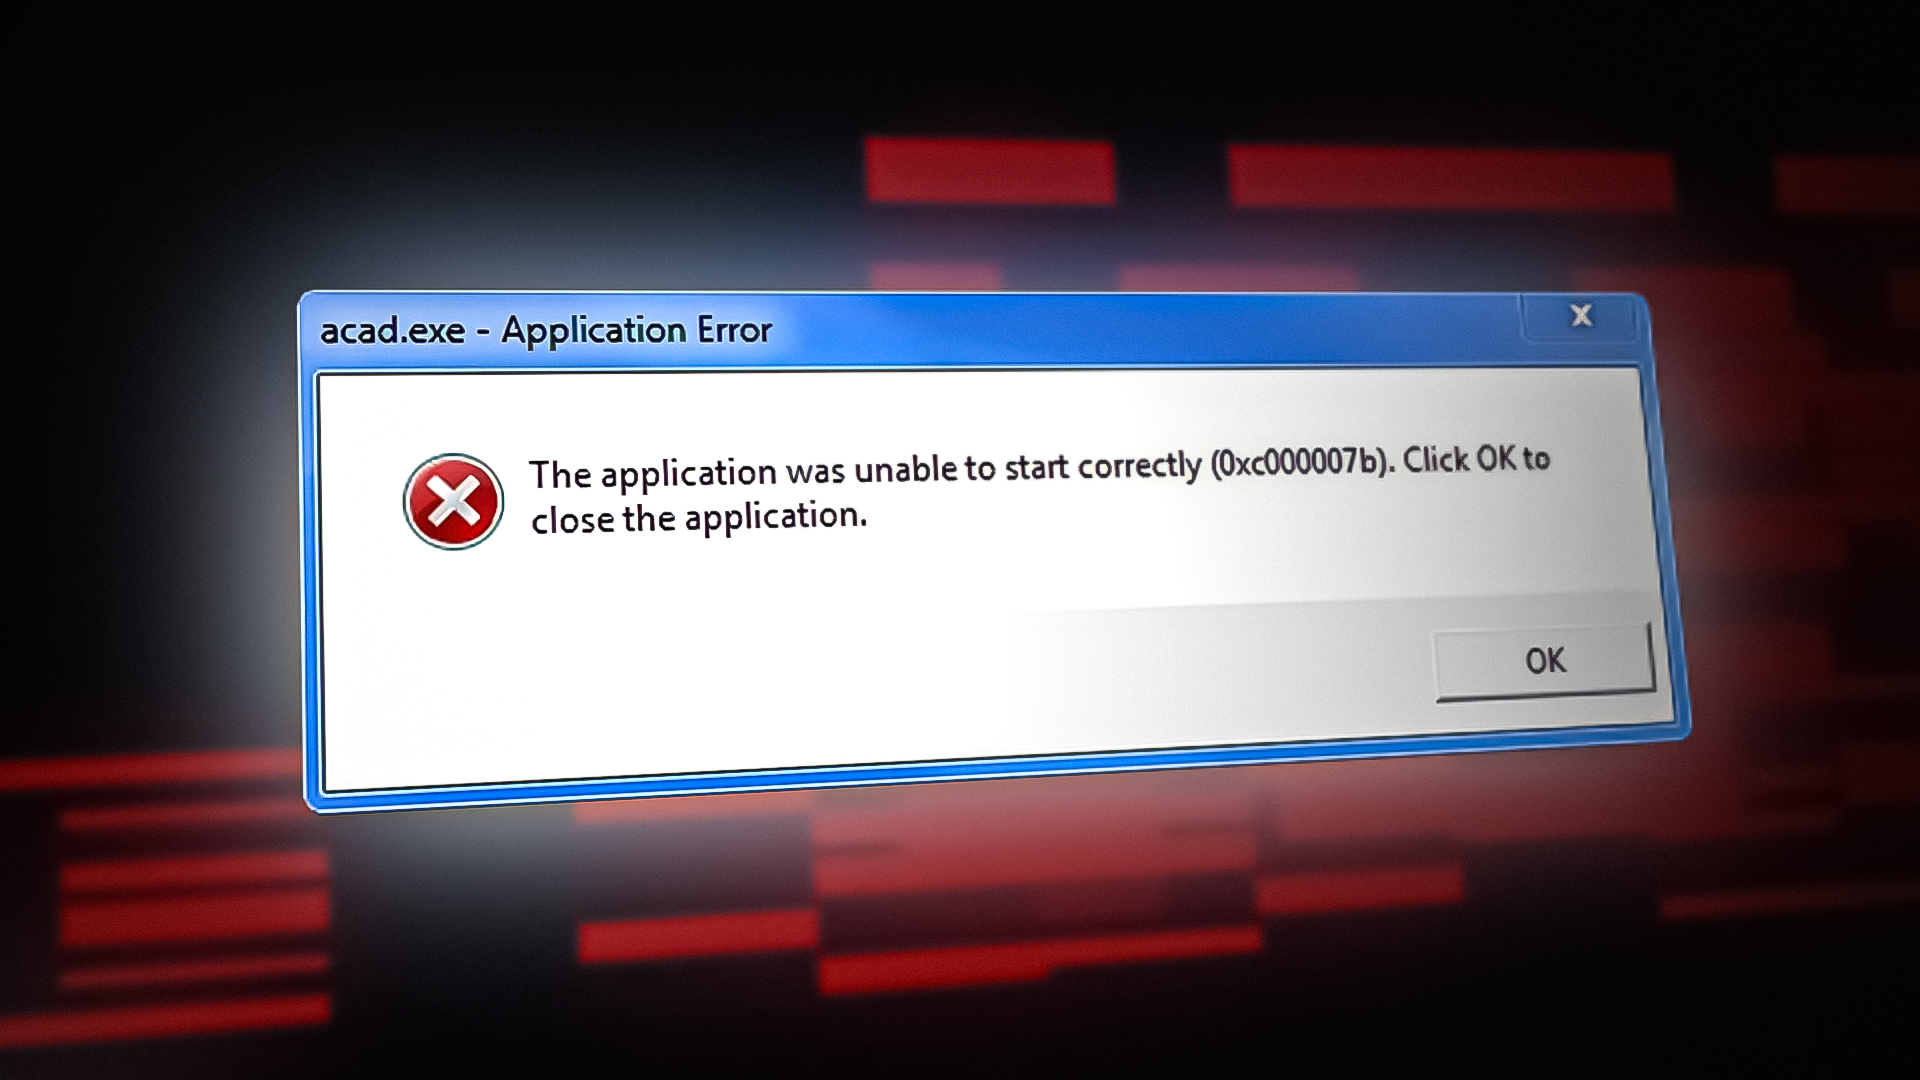 Error 0xc00007b "Application was unable to start correctly"